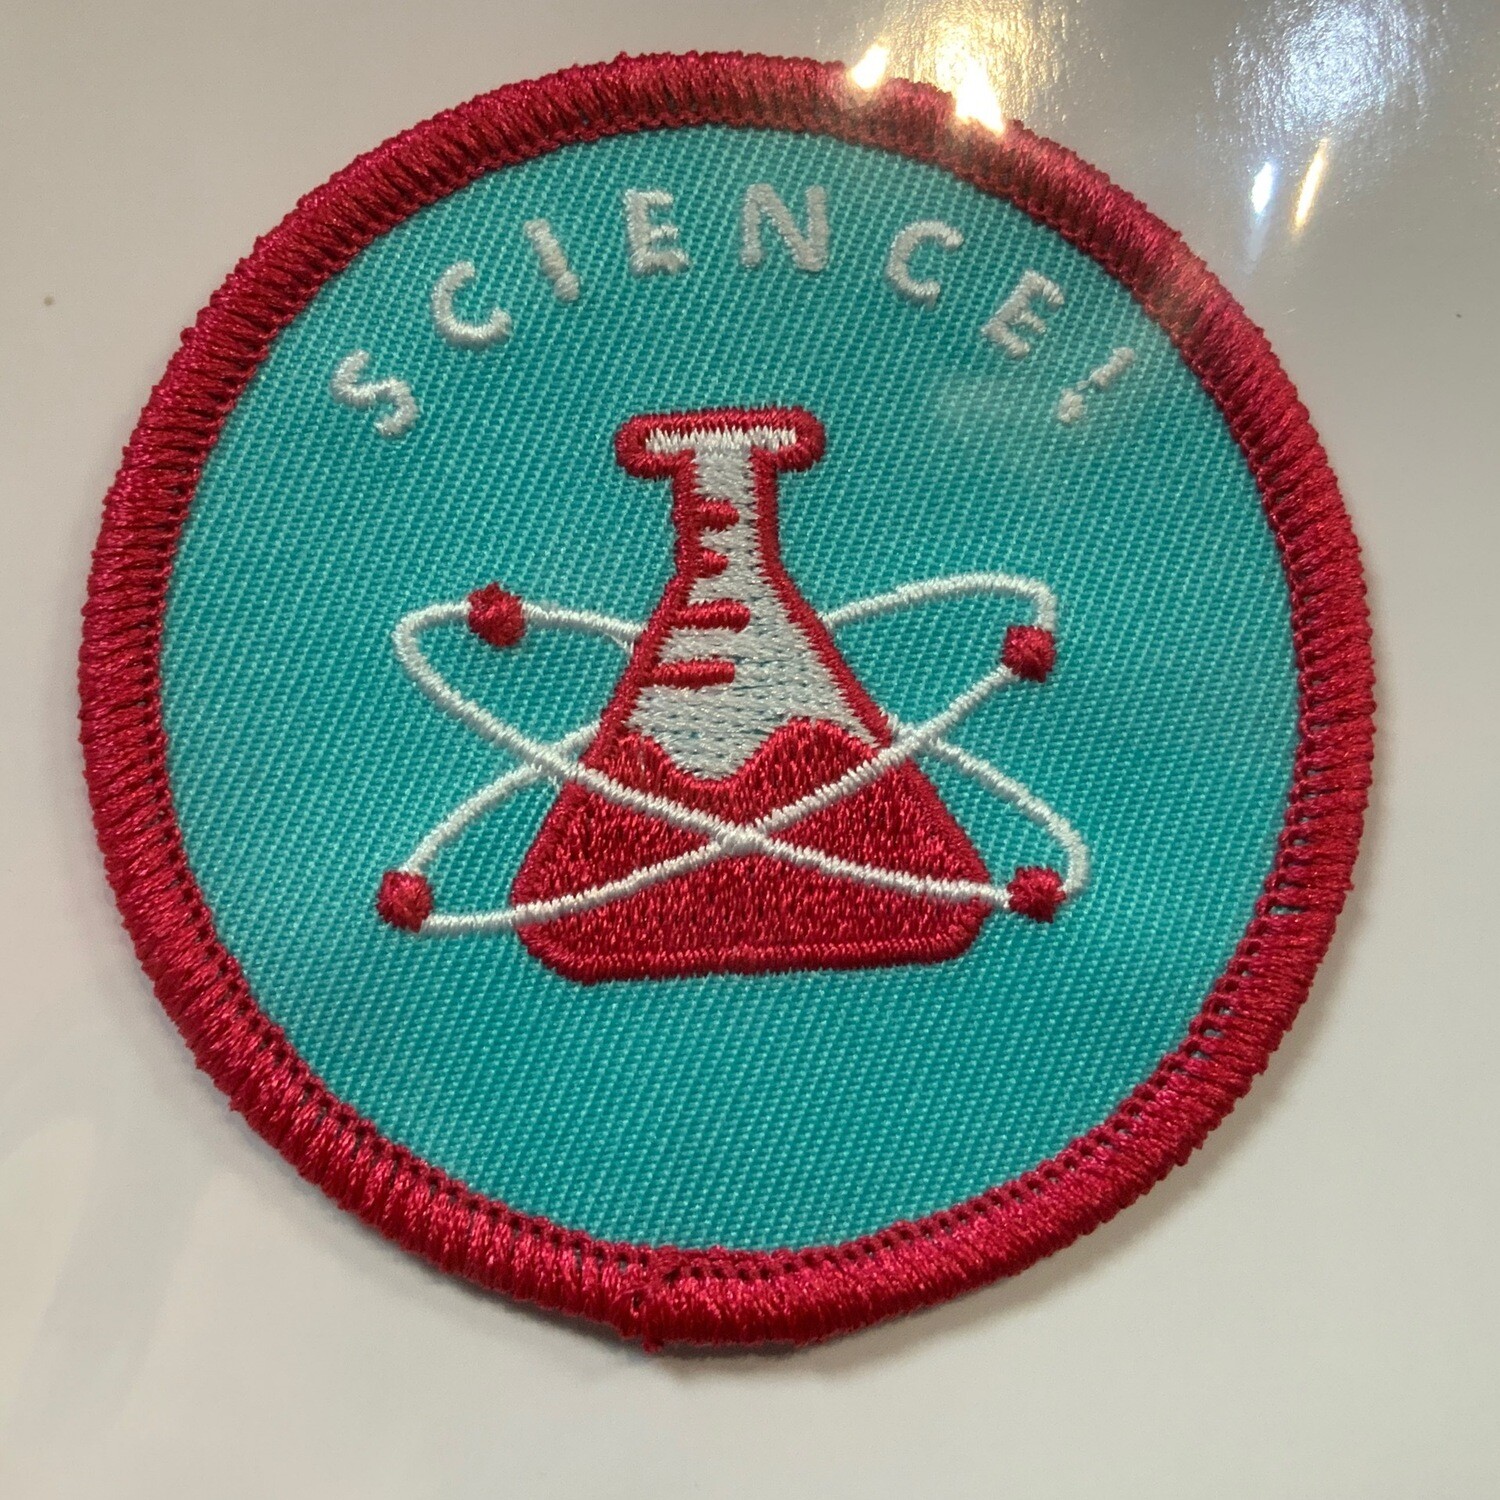 Science - Embroidered Patch from These Are Things